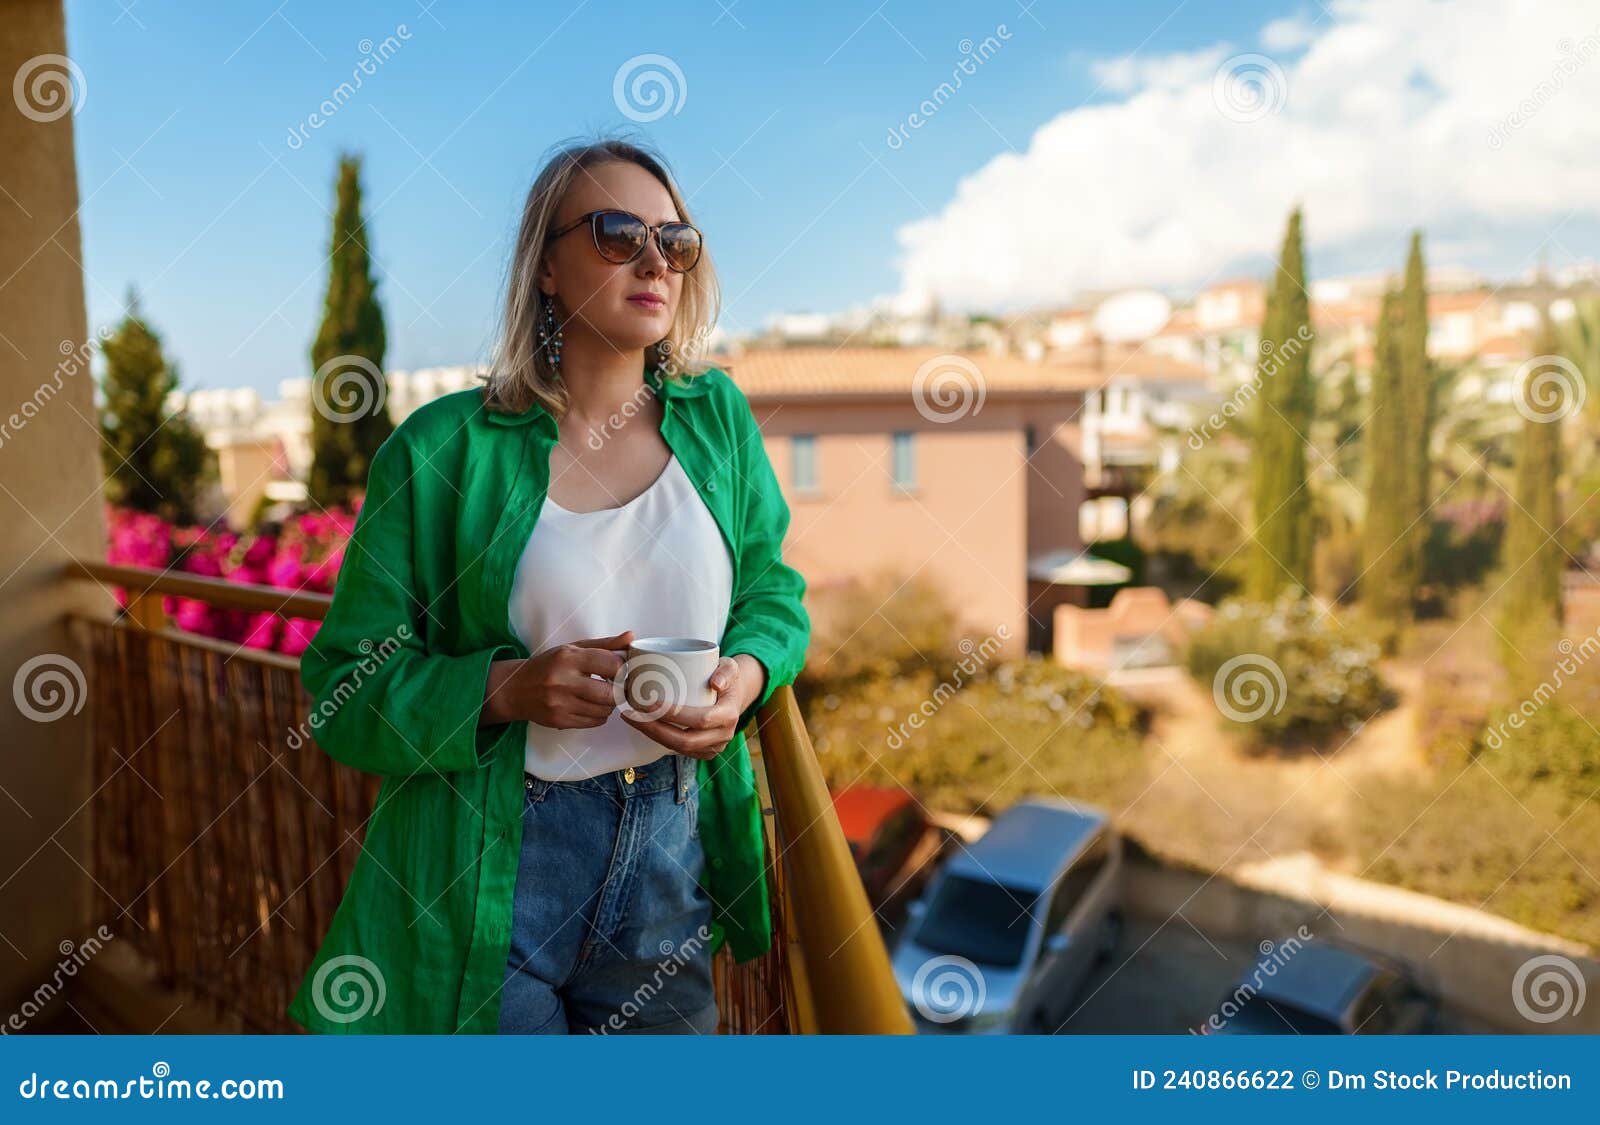 Woman enjoys summer stock photo. Image of calm, relaxation - 240866622